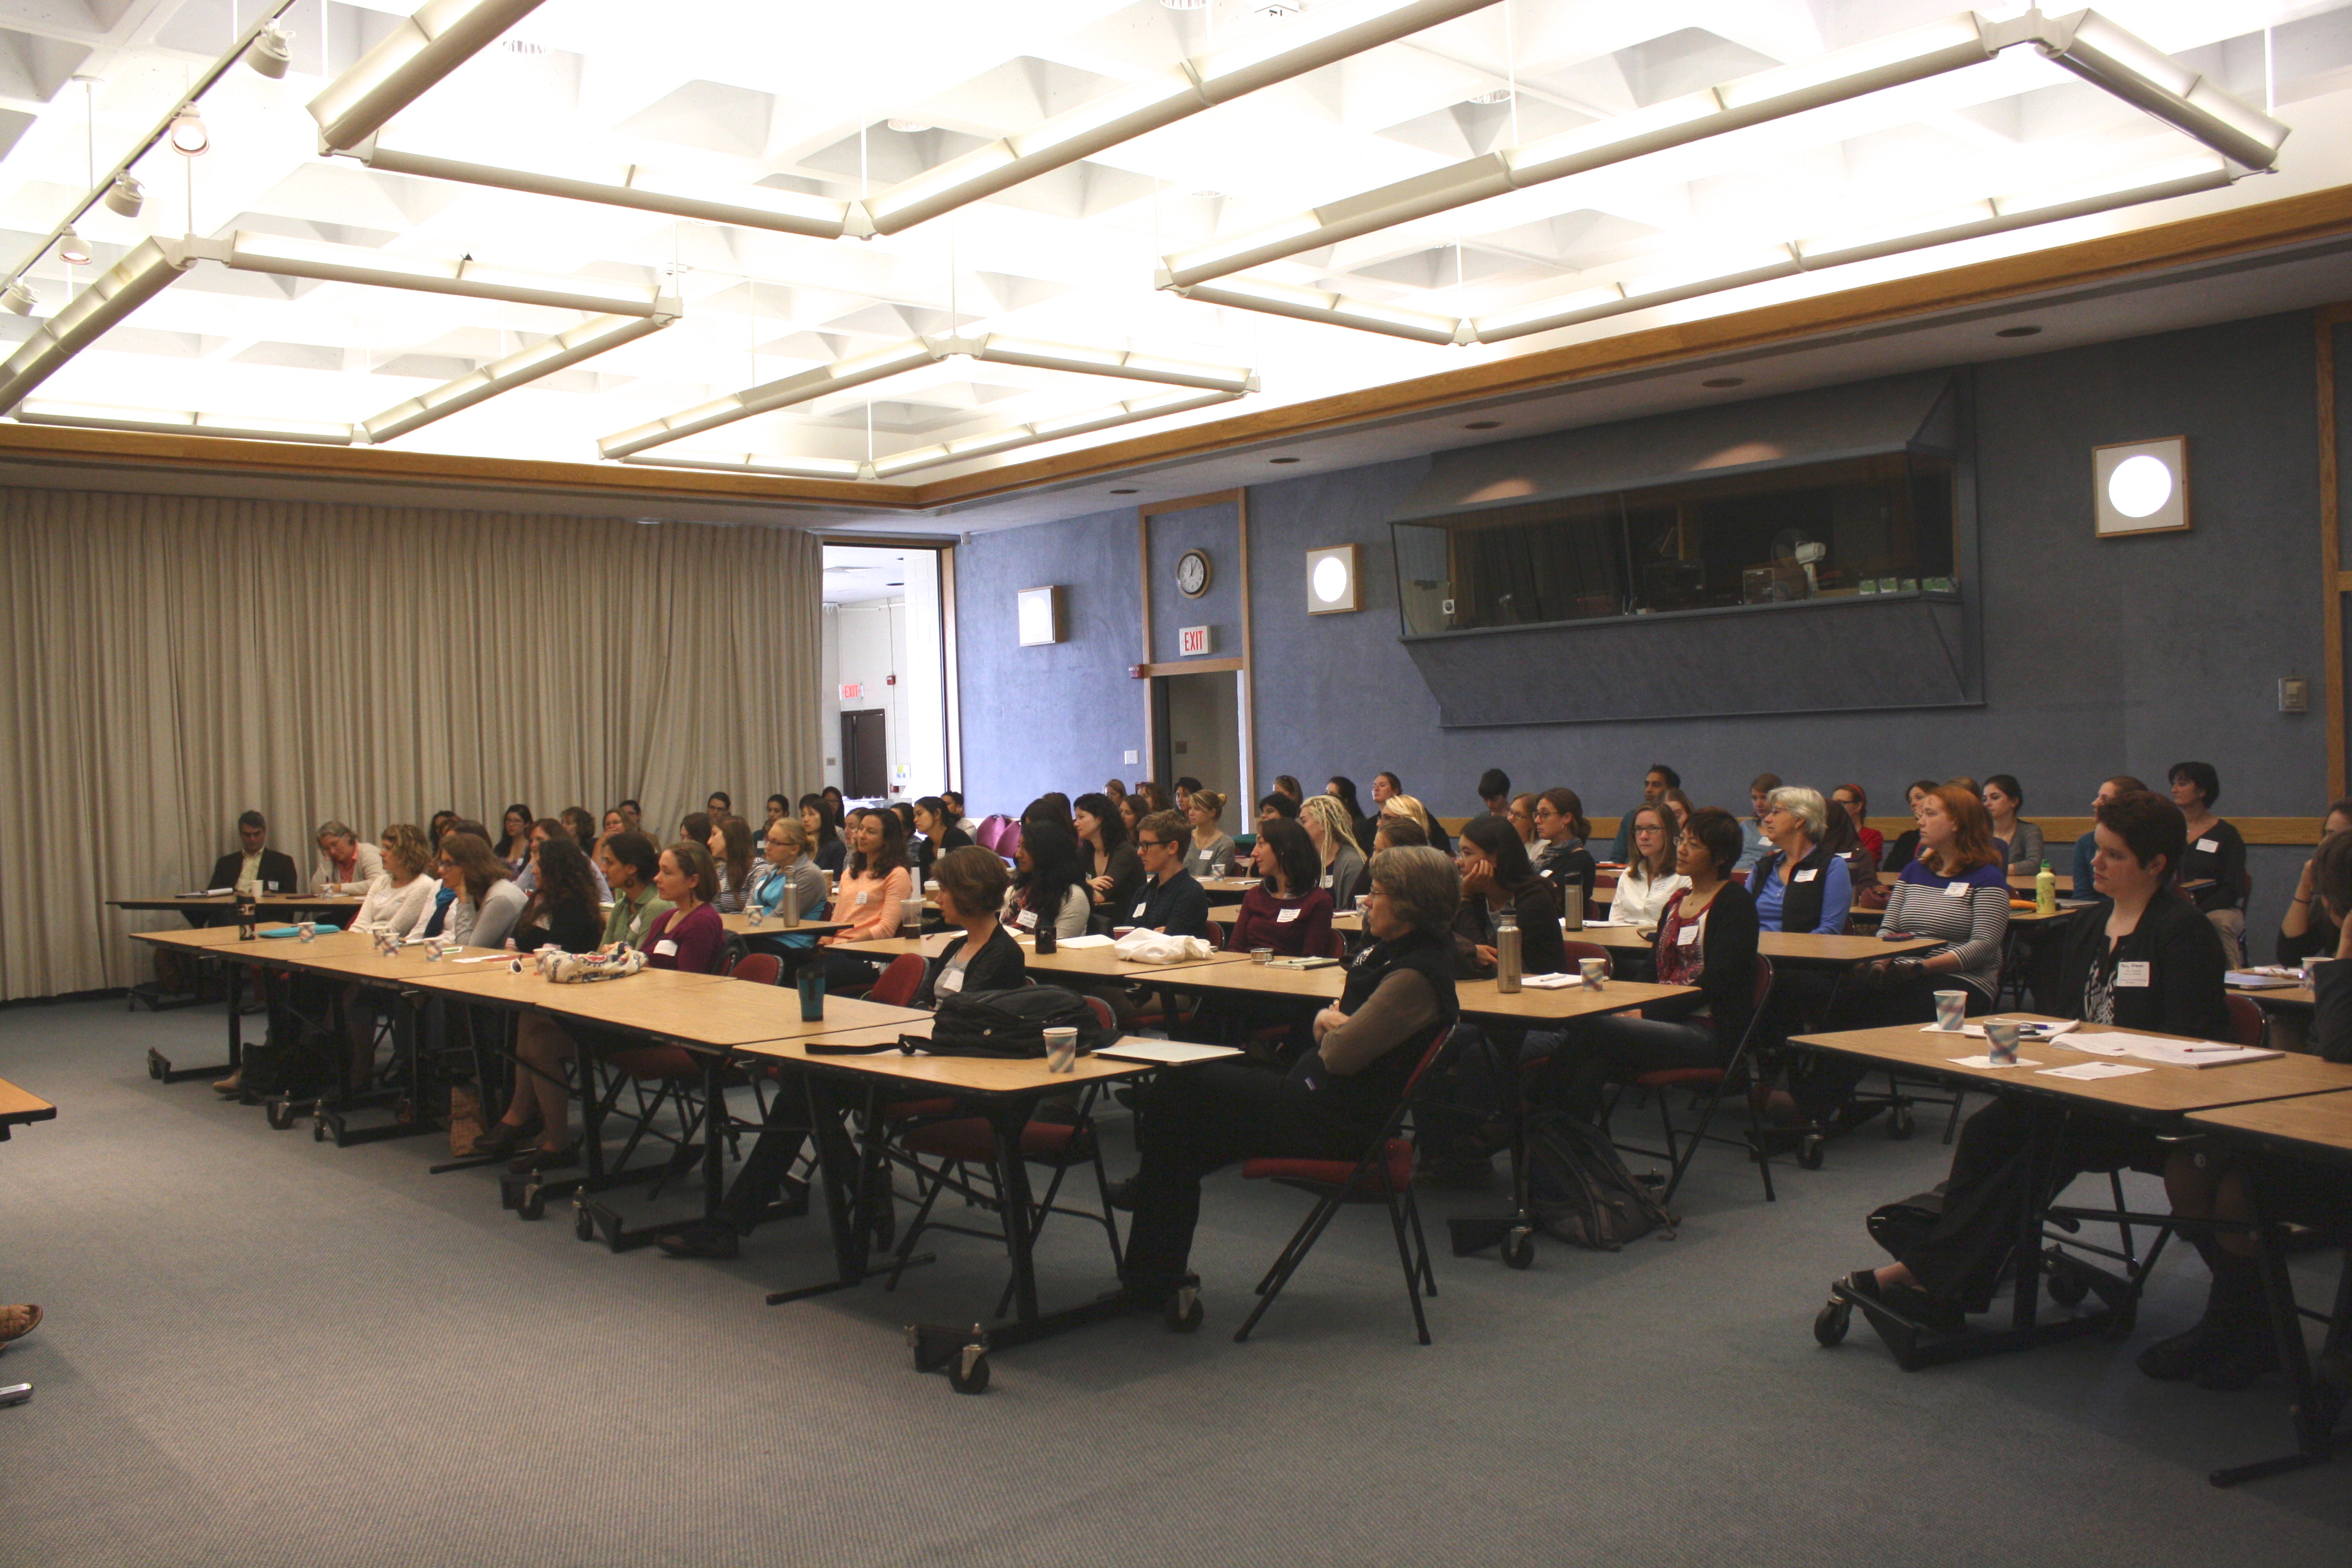 PHOTO: A full house at the 2014 workshop